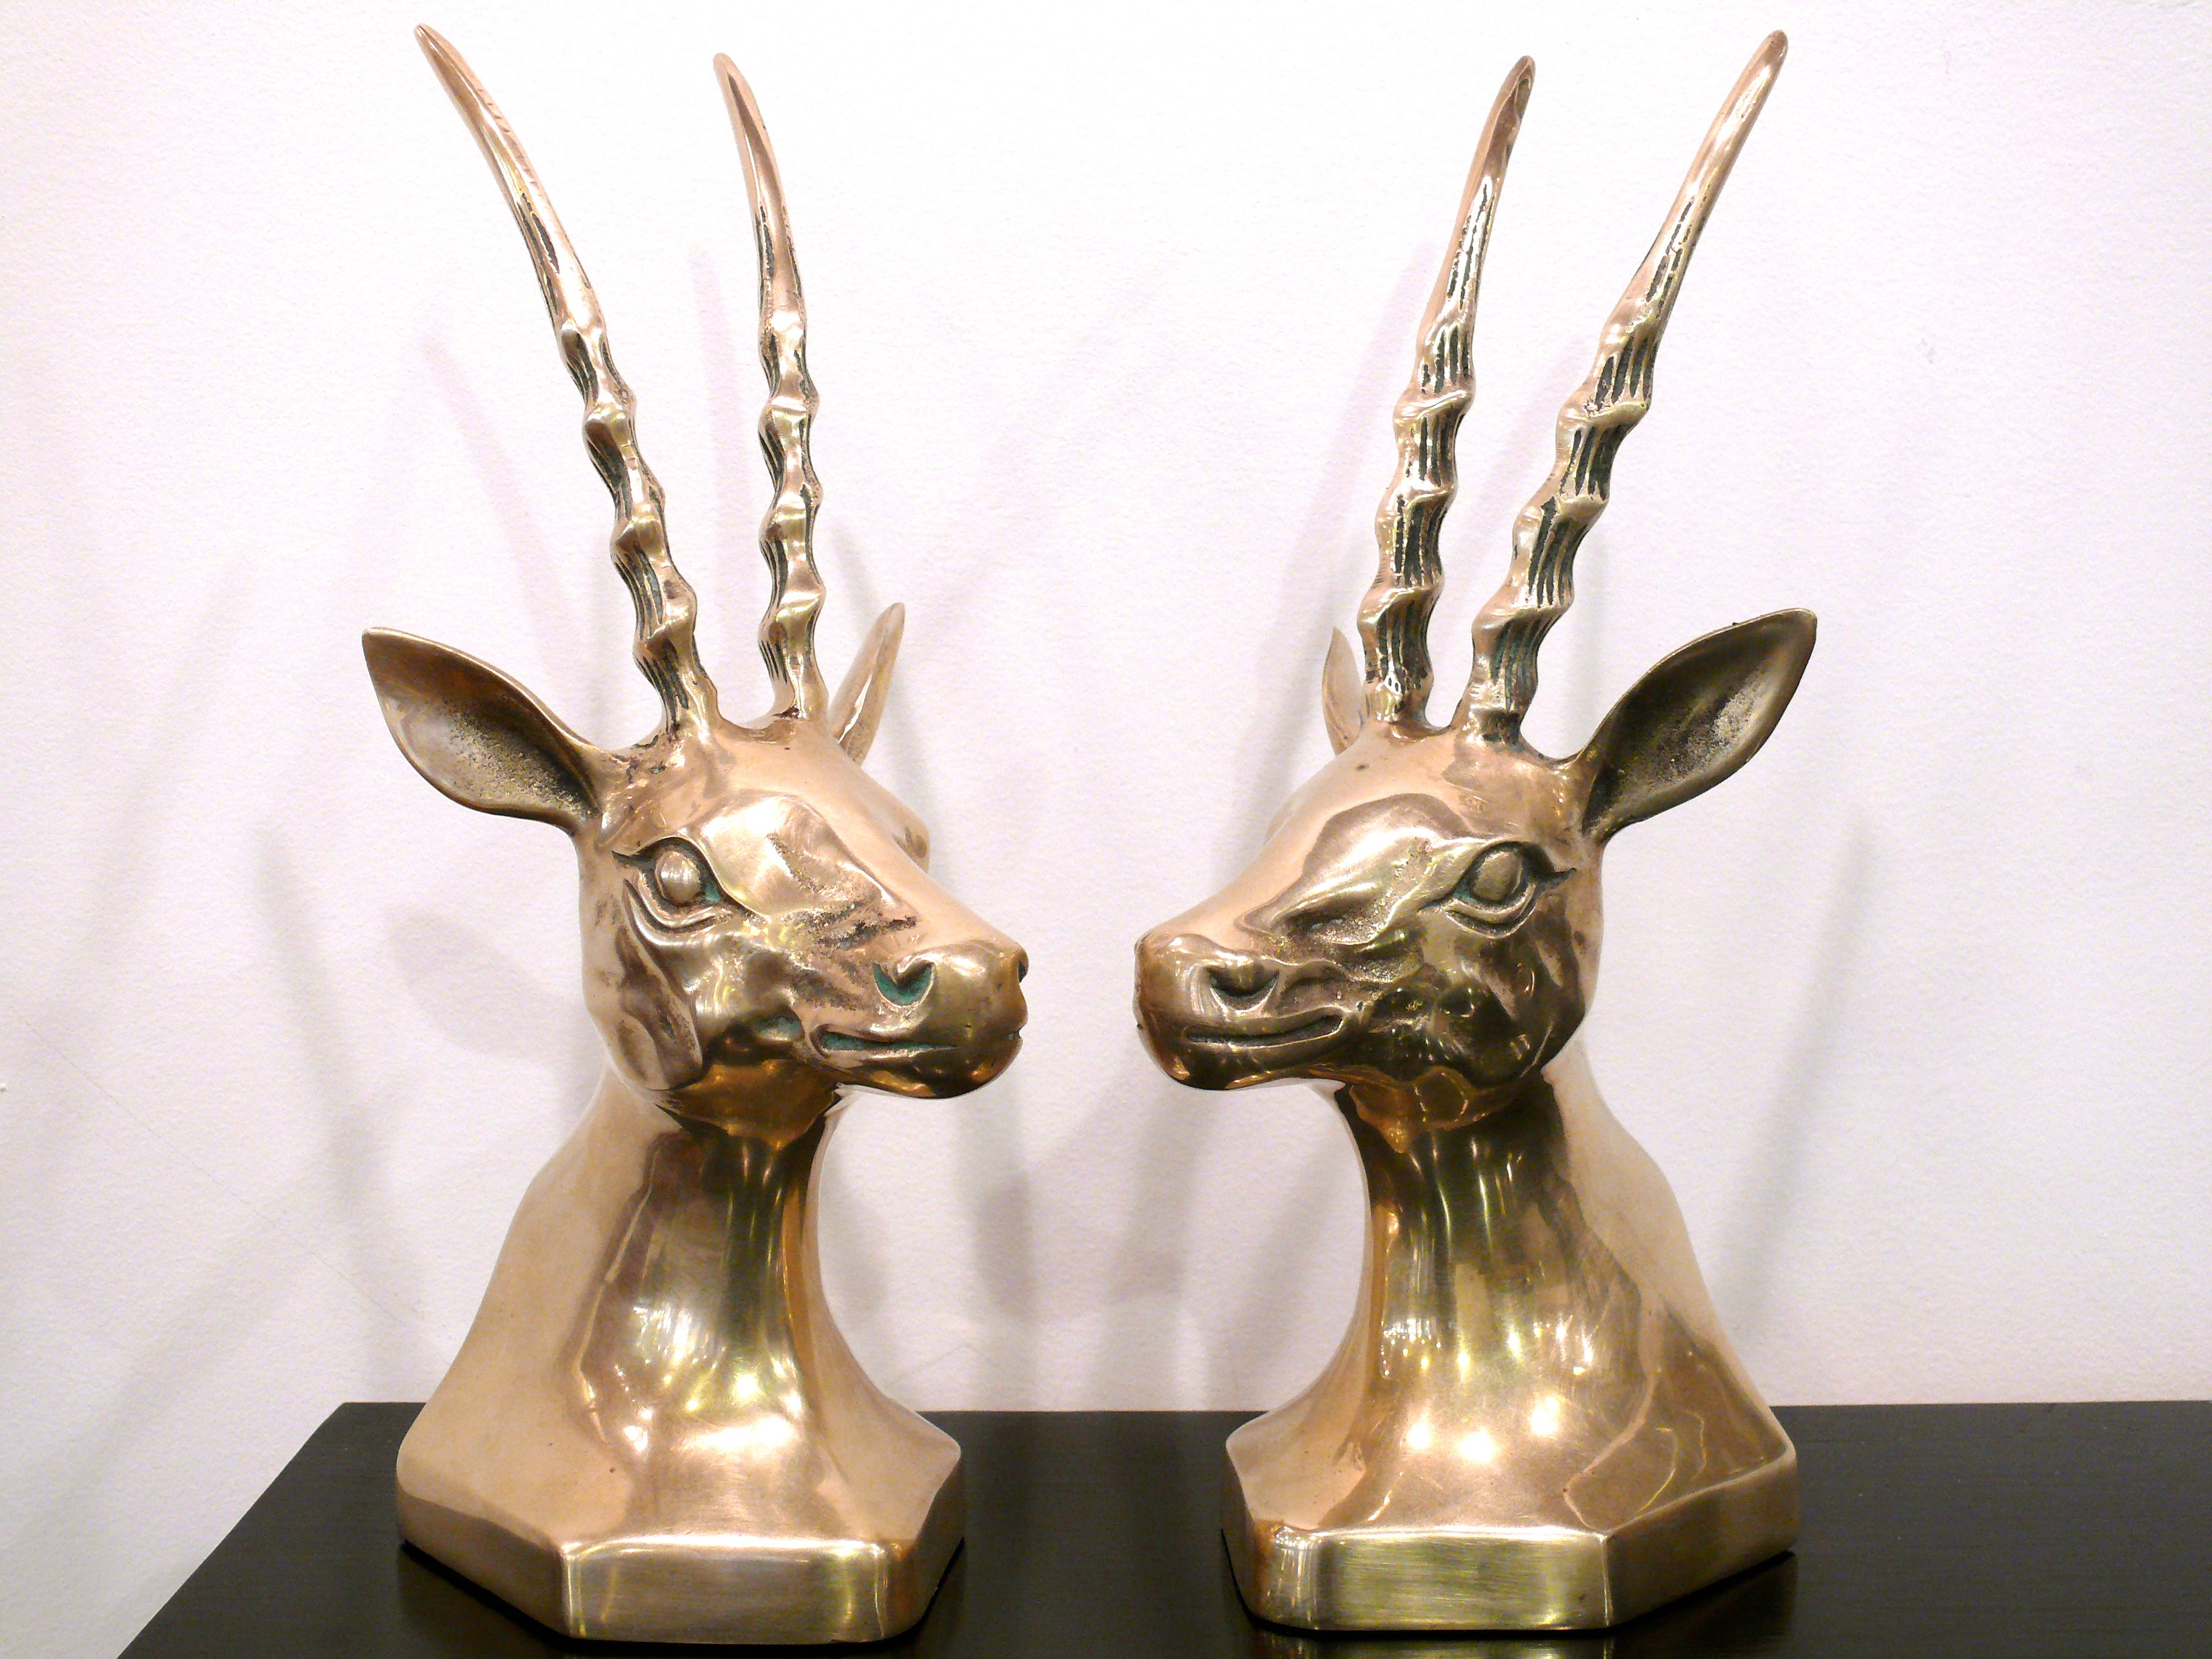 Pair of Brass Antelope Bookends